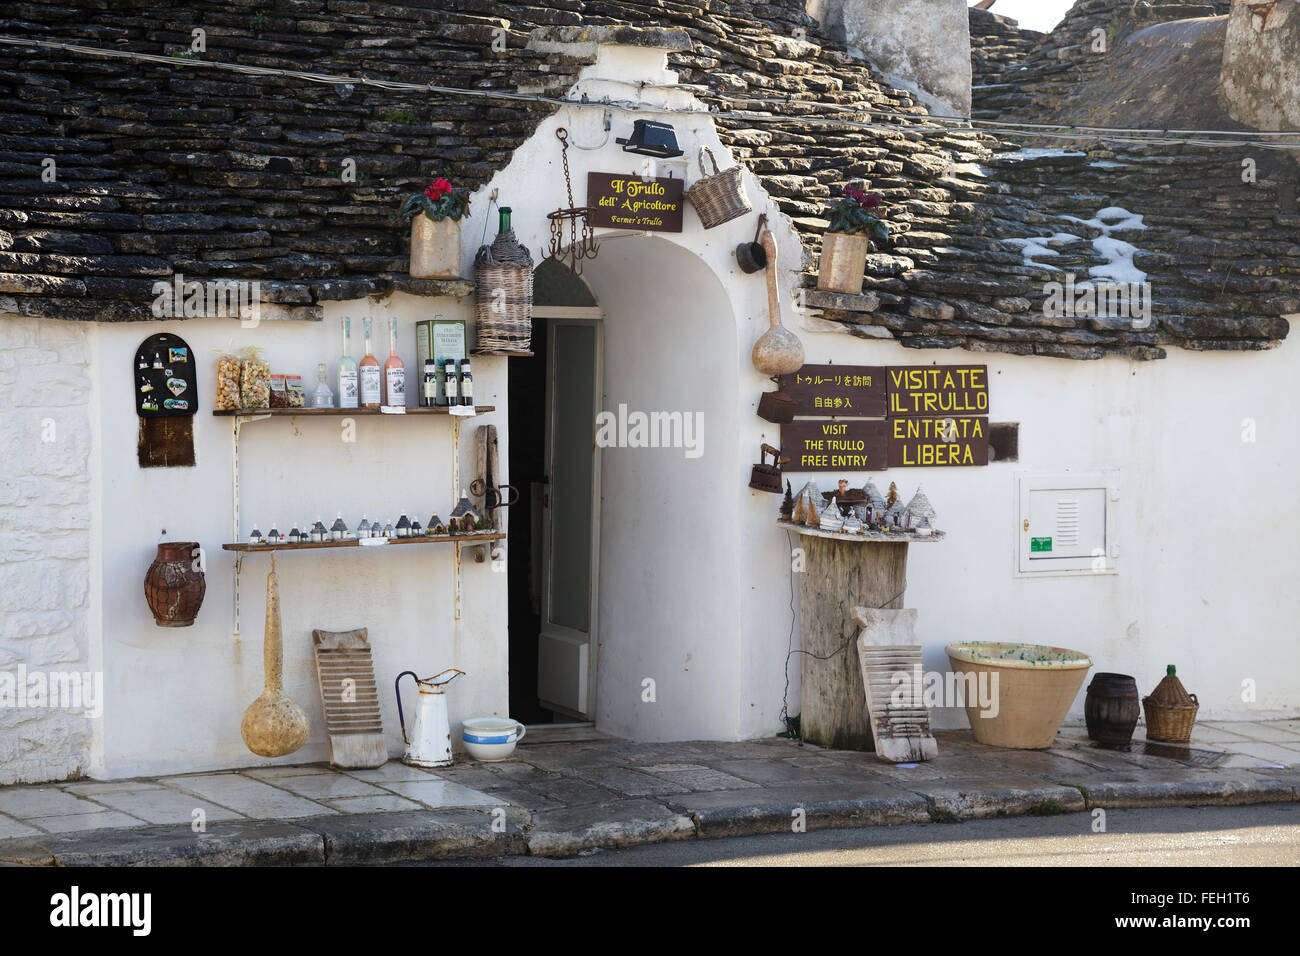 Typical trulli in Alberobello, Puglia, Italy - shop with signs in different languages Stock Photo